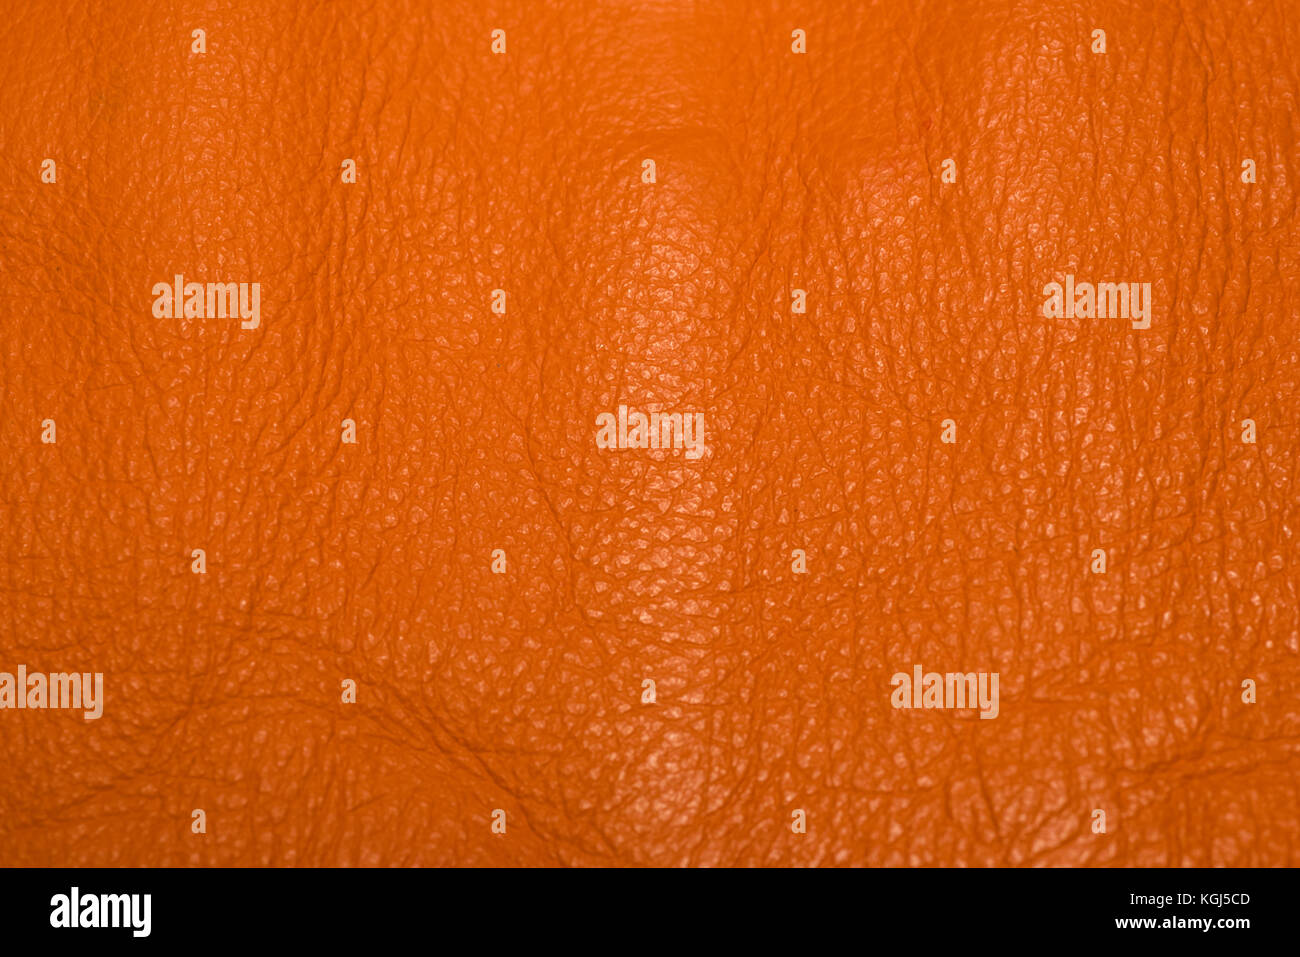 Orange leather showing surface details and creases. Stock Photo